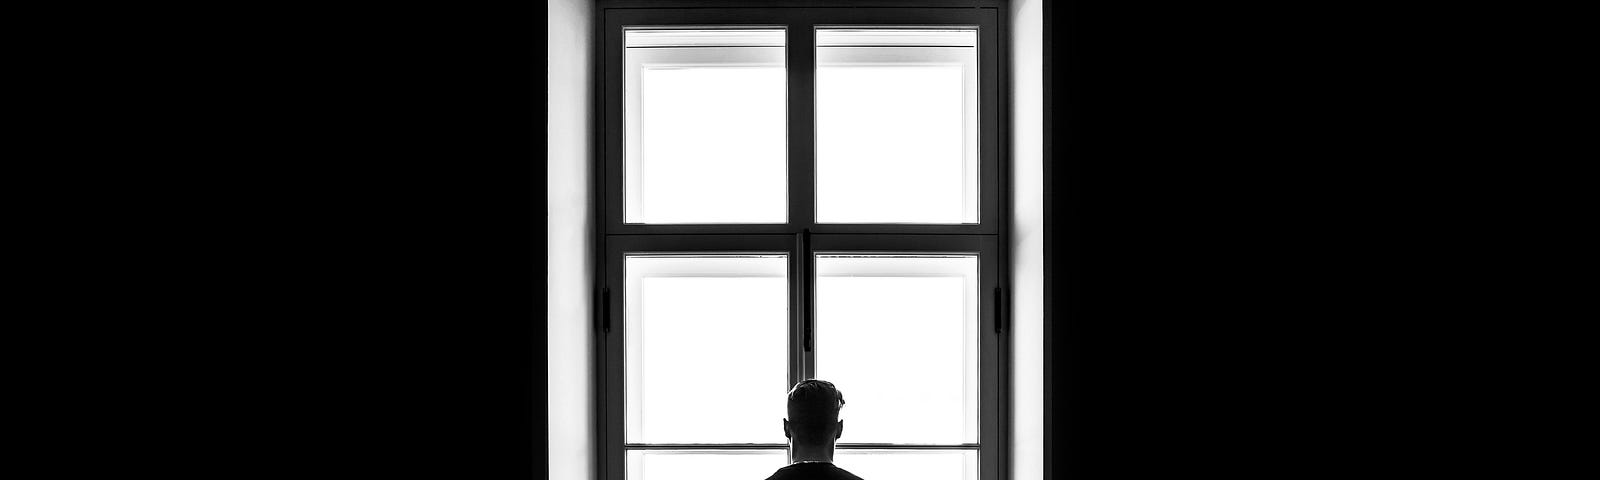 lone figure standing in front of a windowpane